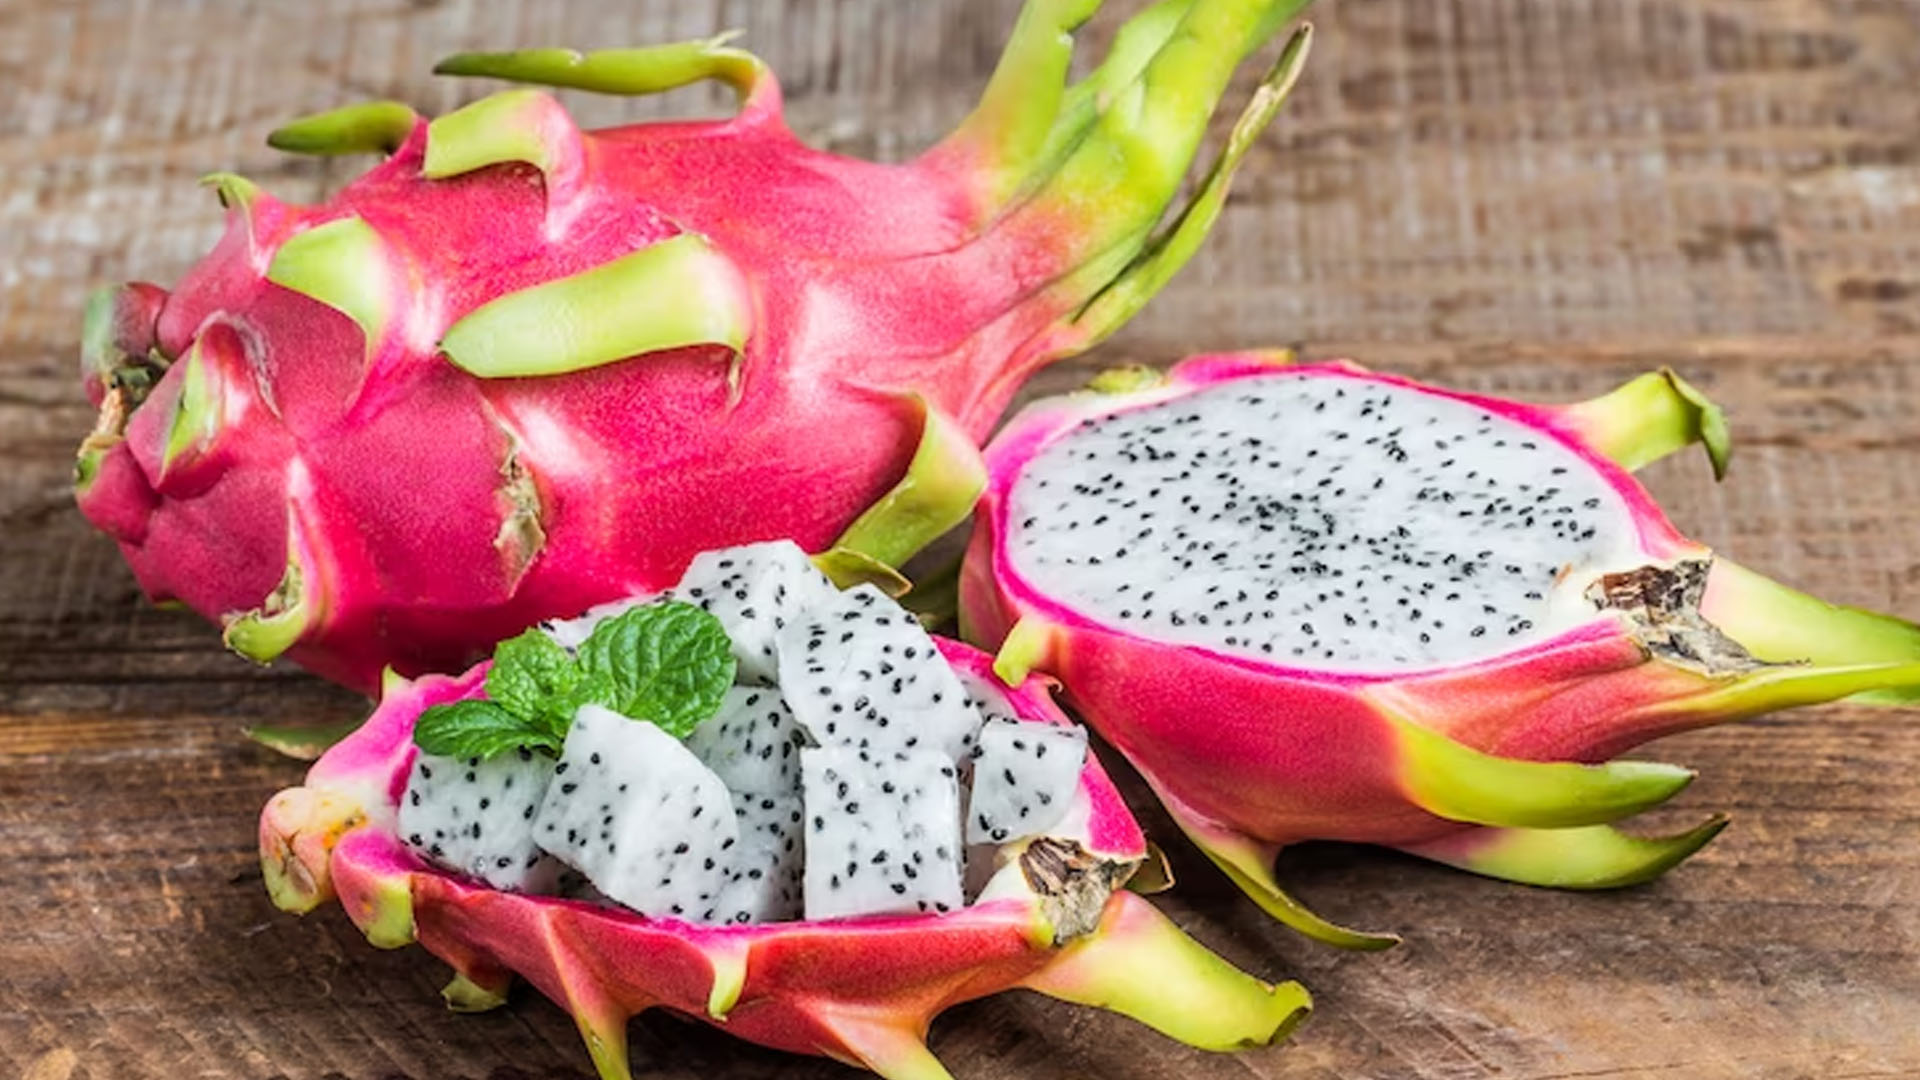 How to Eat Dragon Fruit Health Benefits?